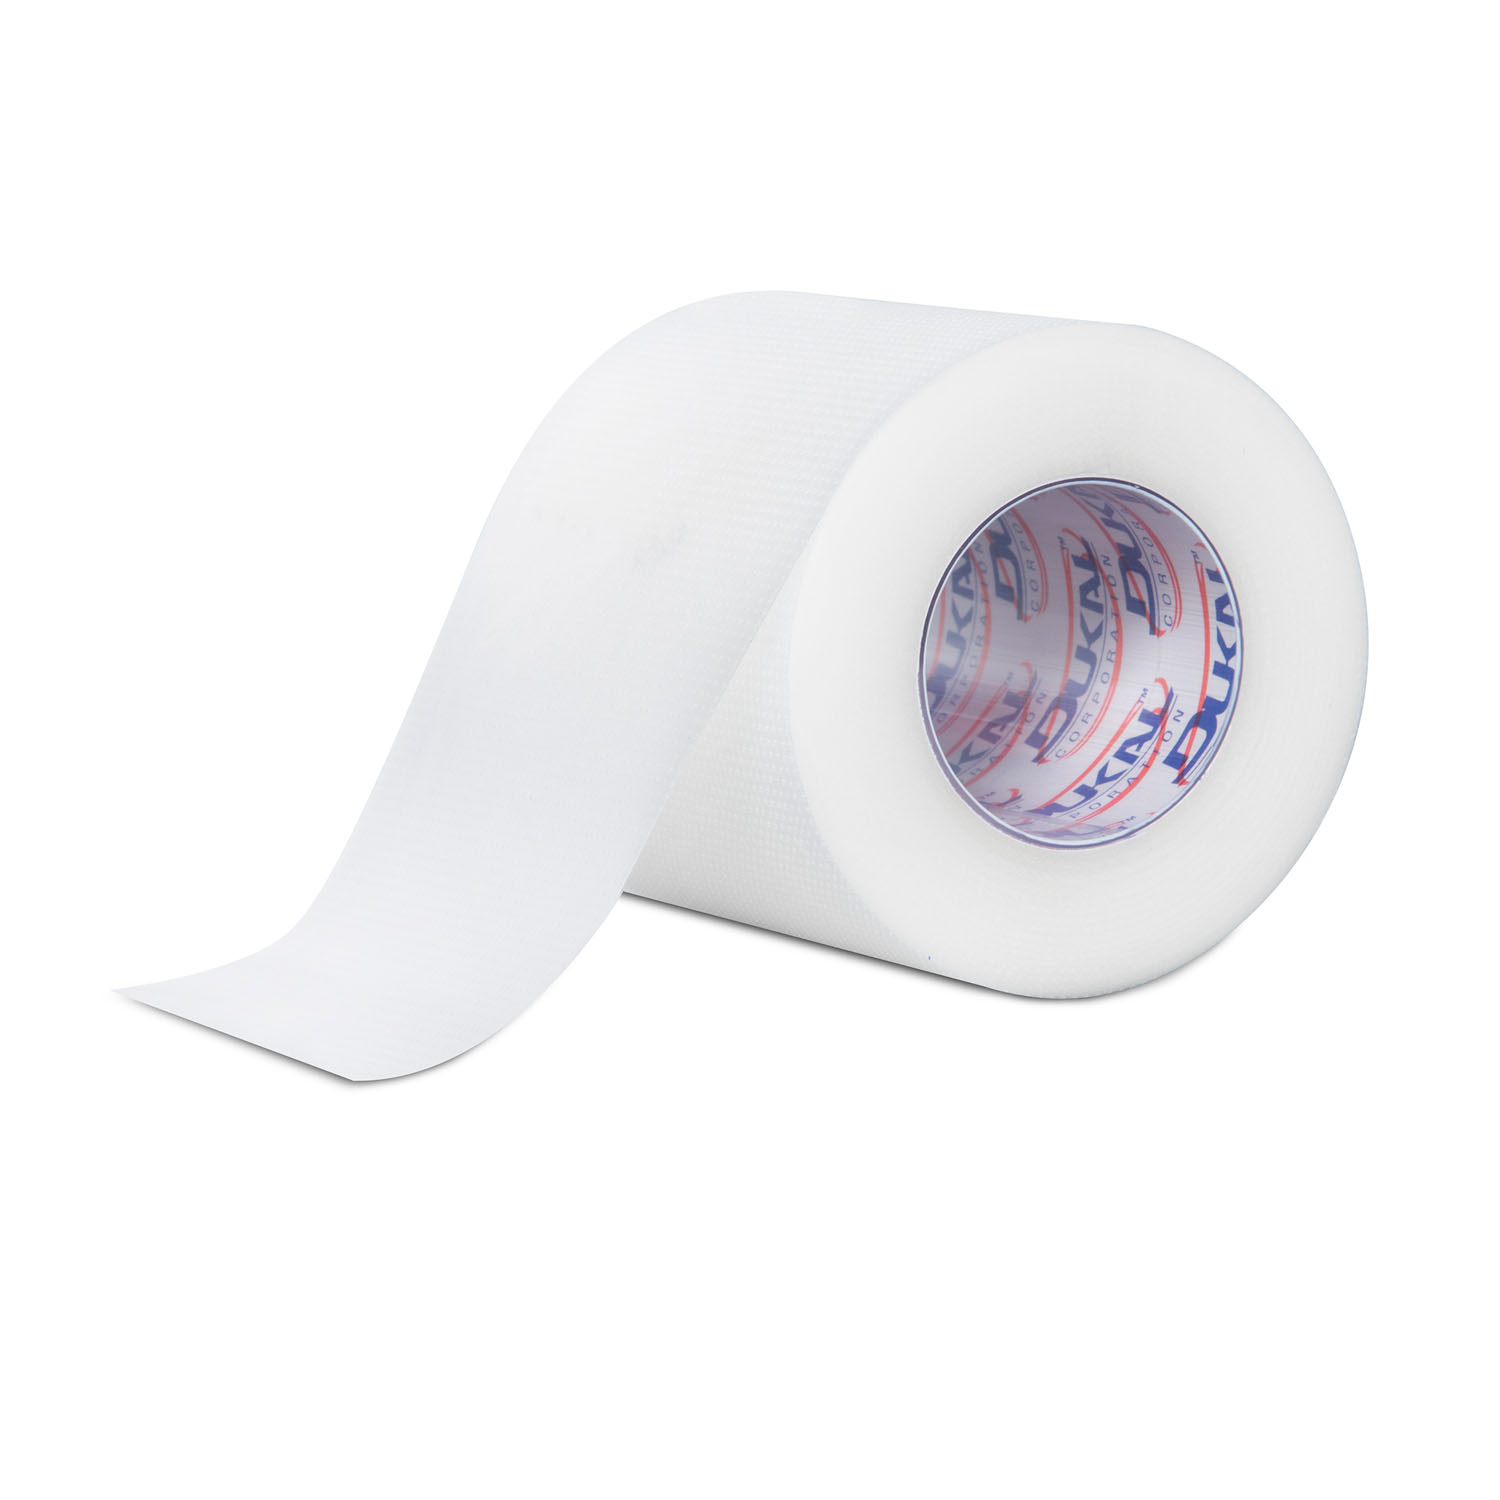 DUKAL SURGICAL TAPE - TRANSPARENT : T210 BX $11.93 Stocked